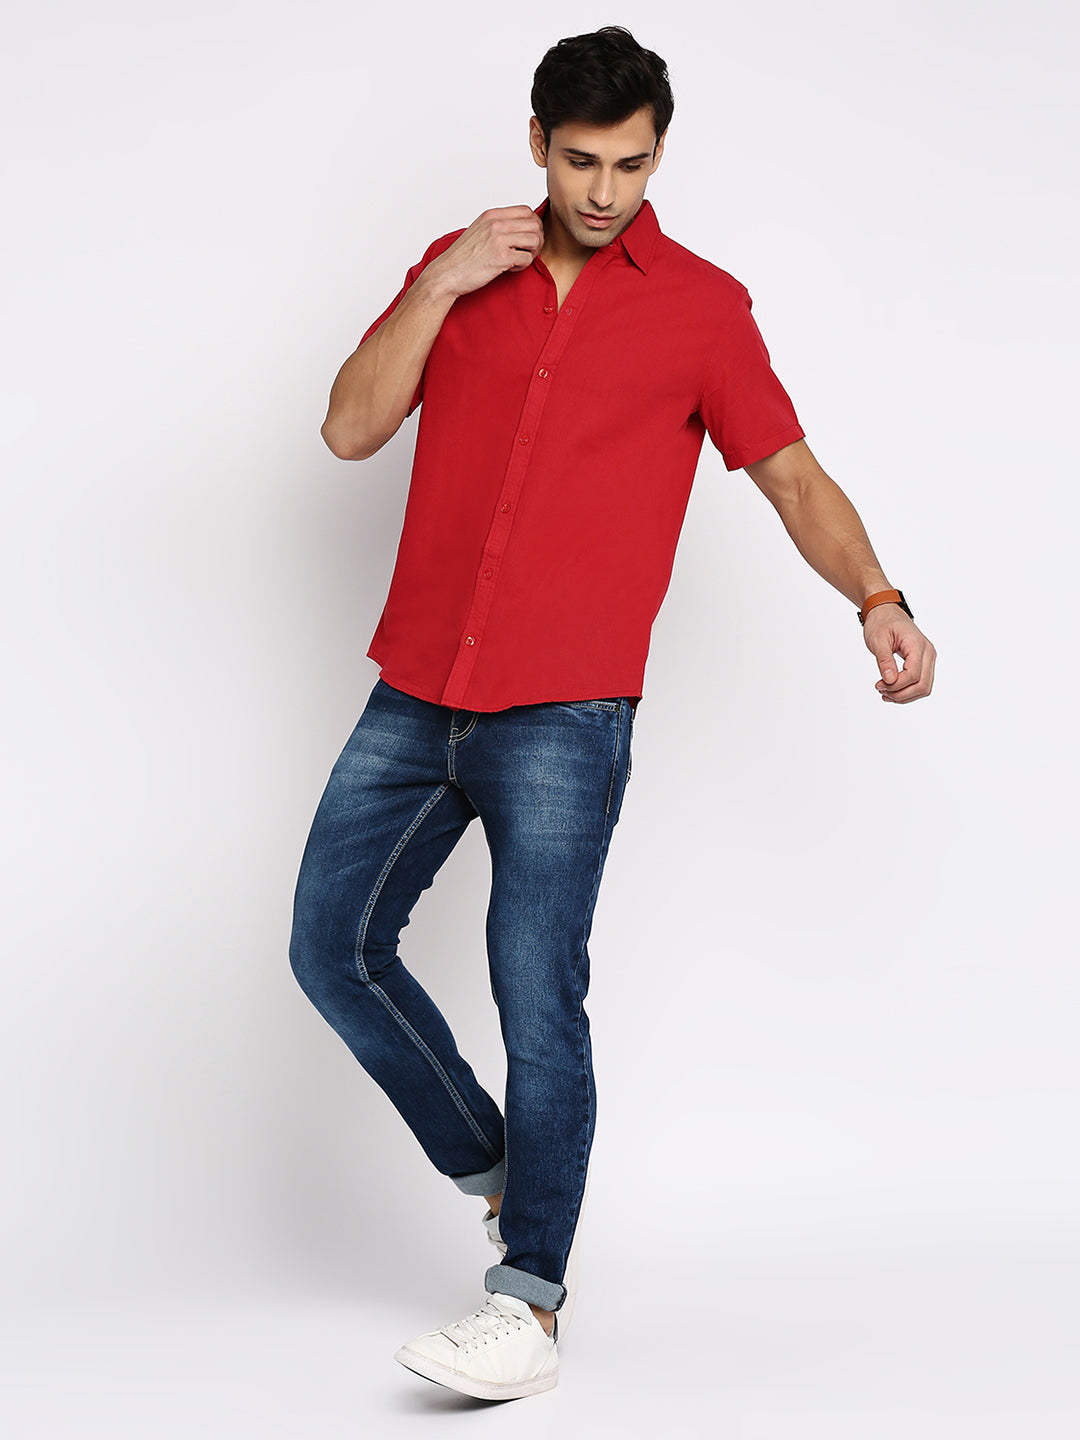 Absolute Linen Cotton Red Slim Fit Shirt